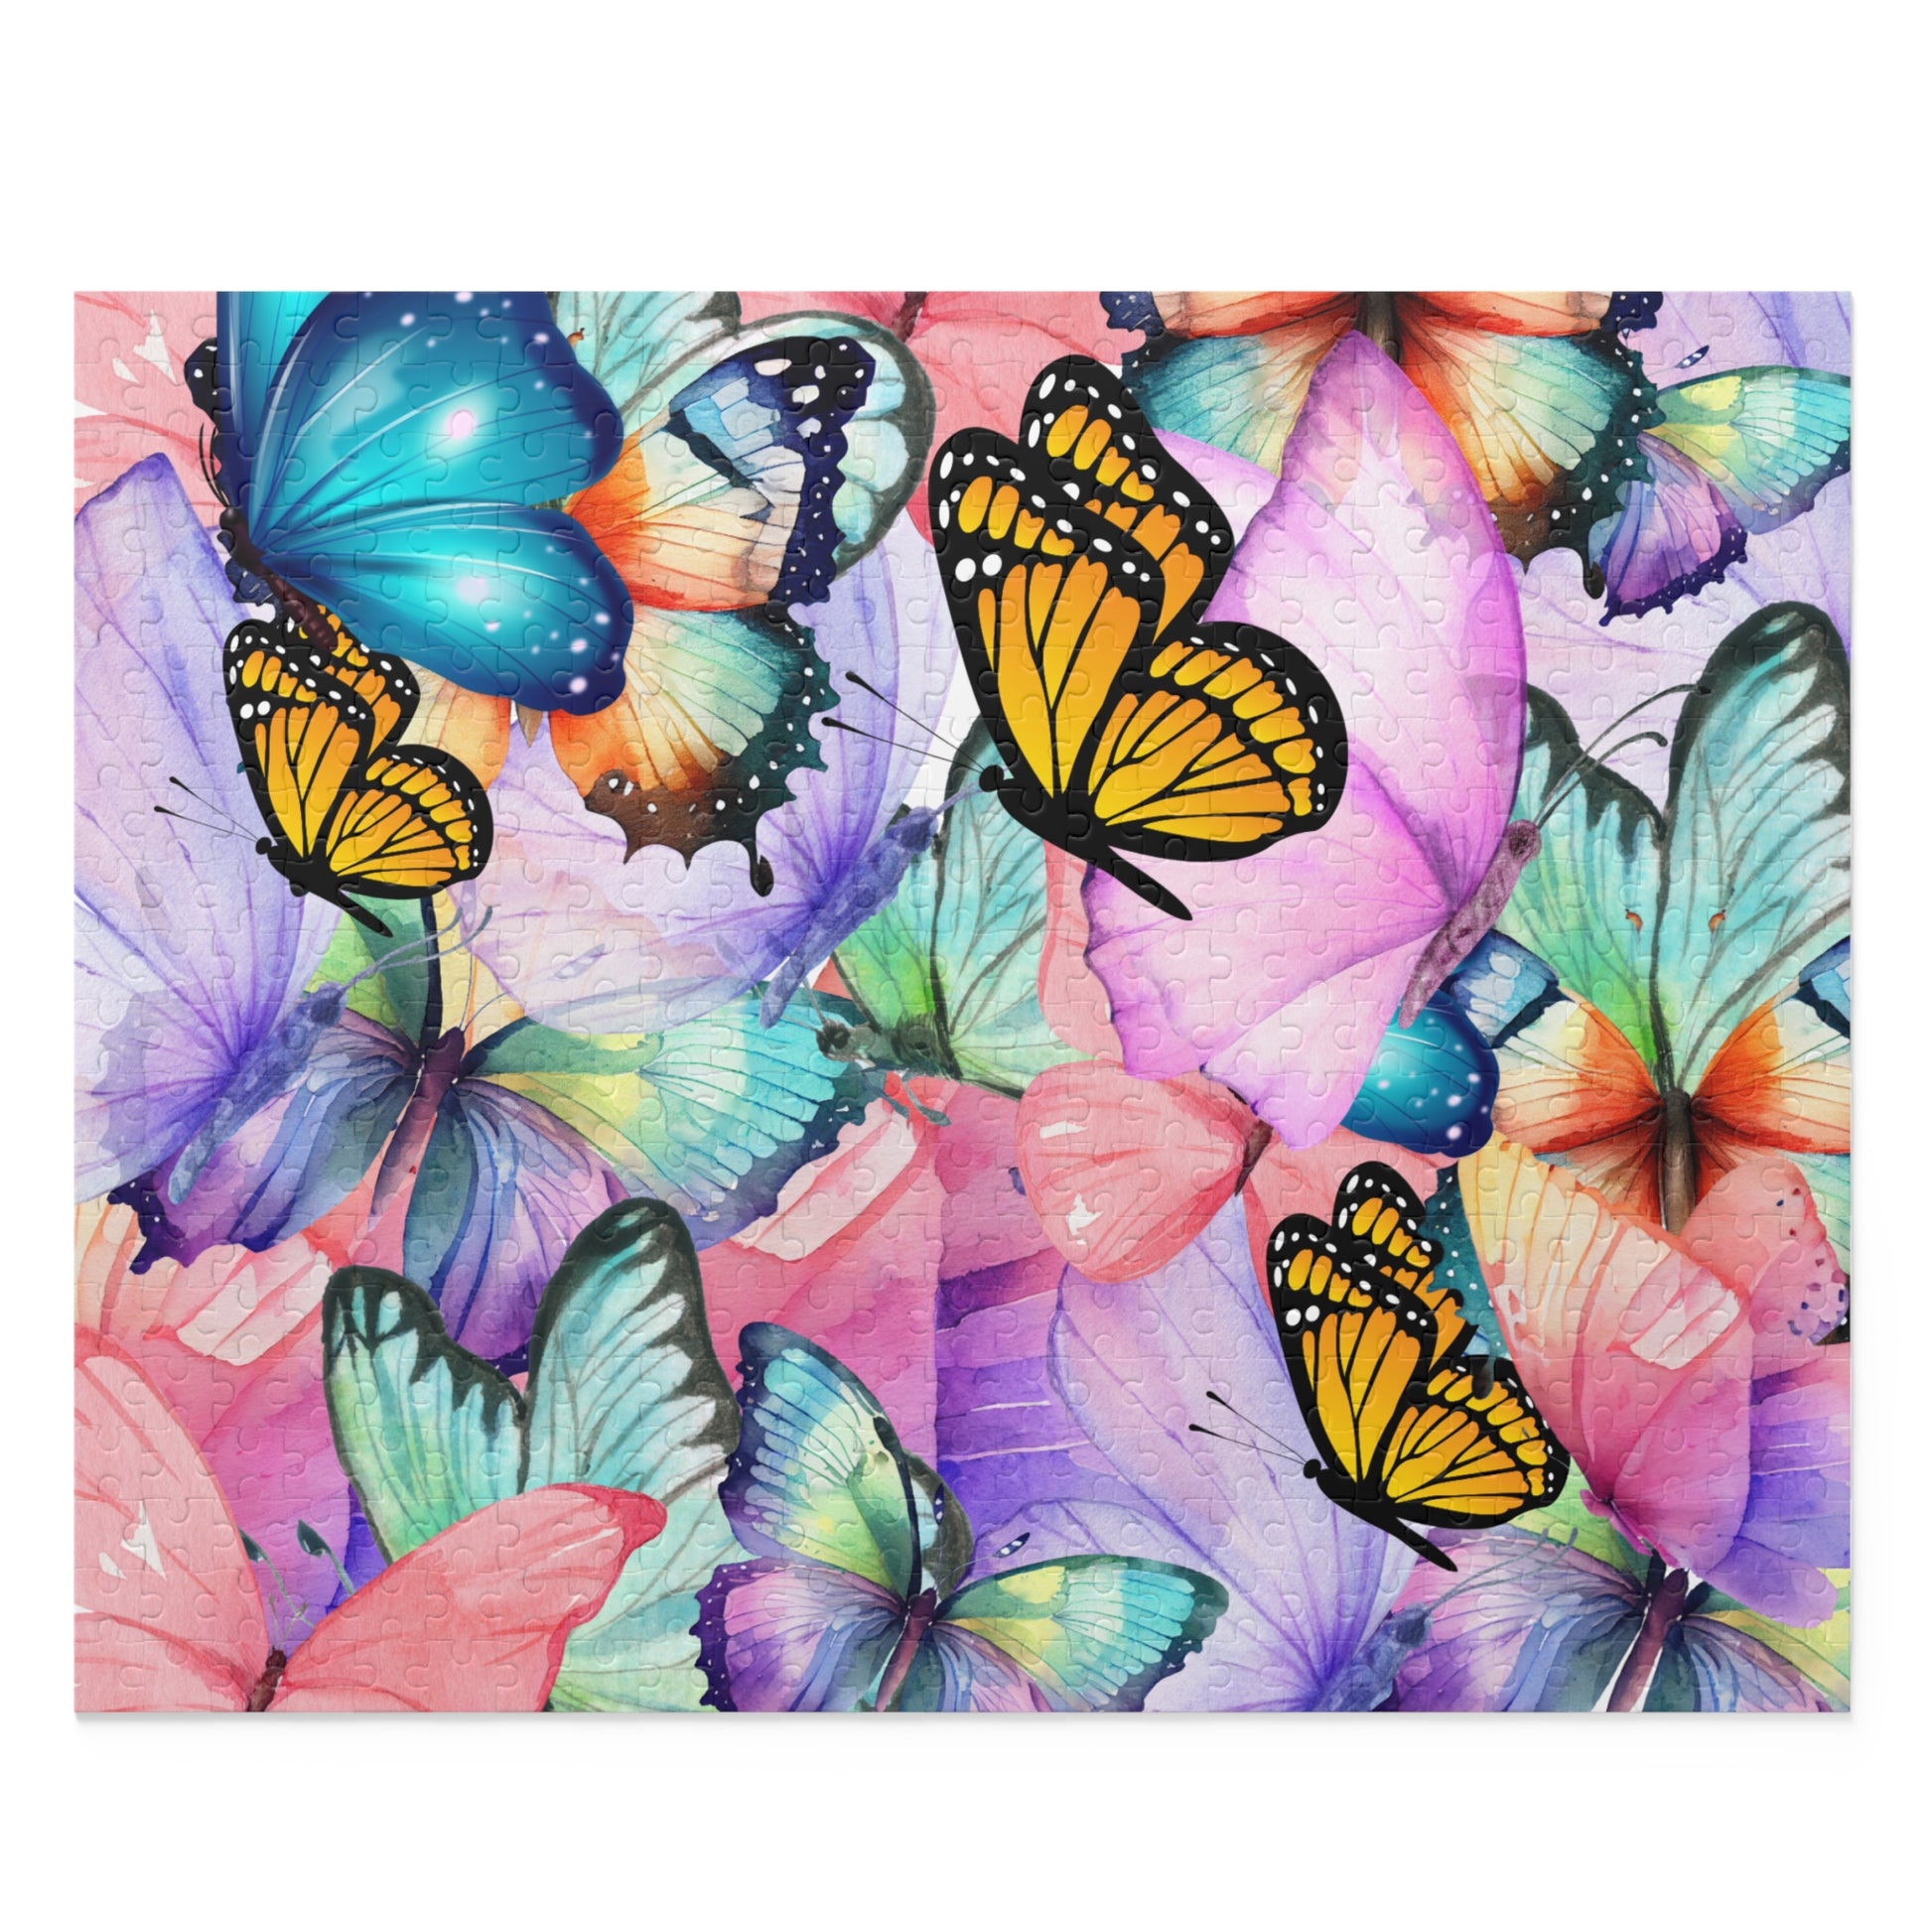 500-piece butterfly jigsaw puzzle for family game night or as a gift, completed puzzle view.